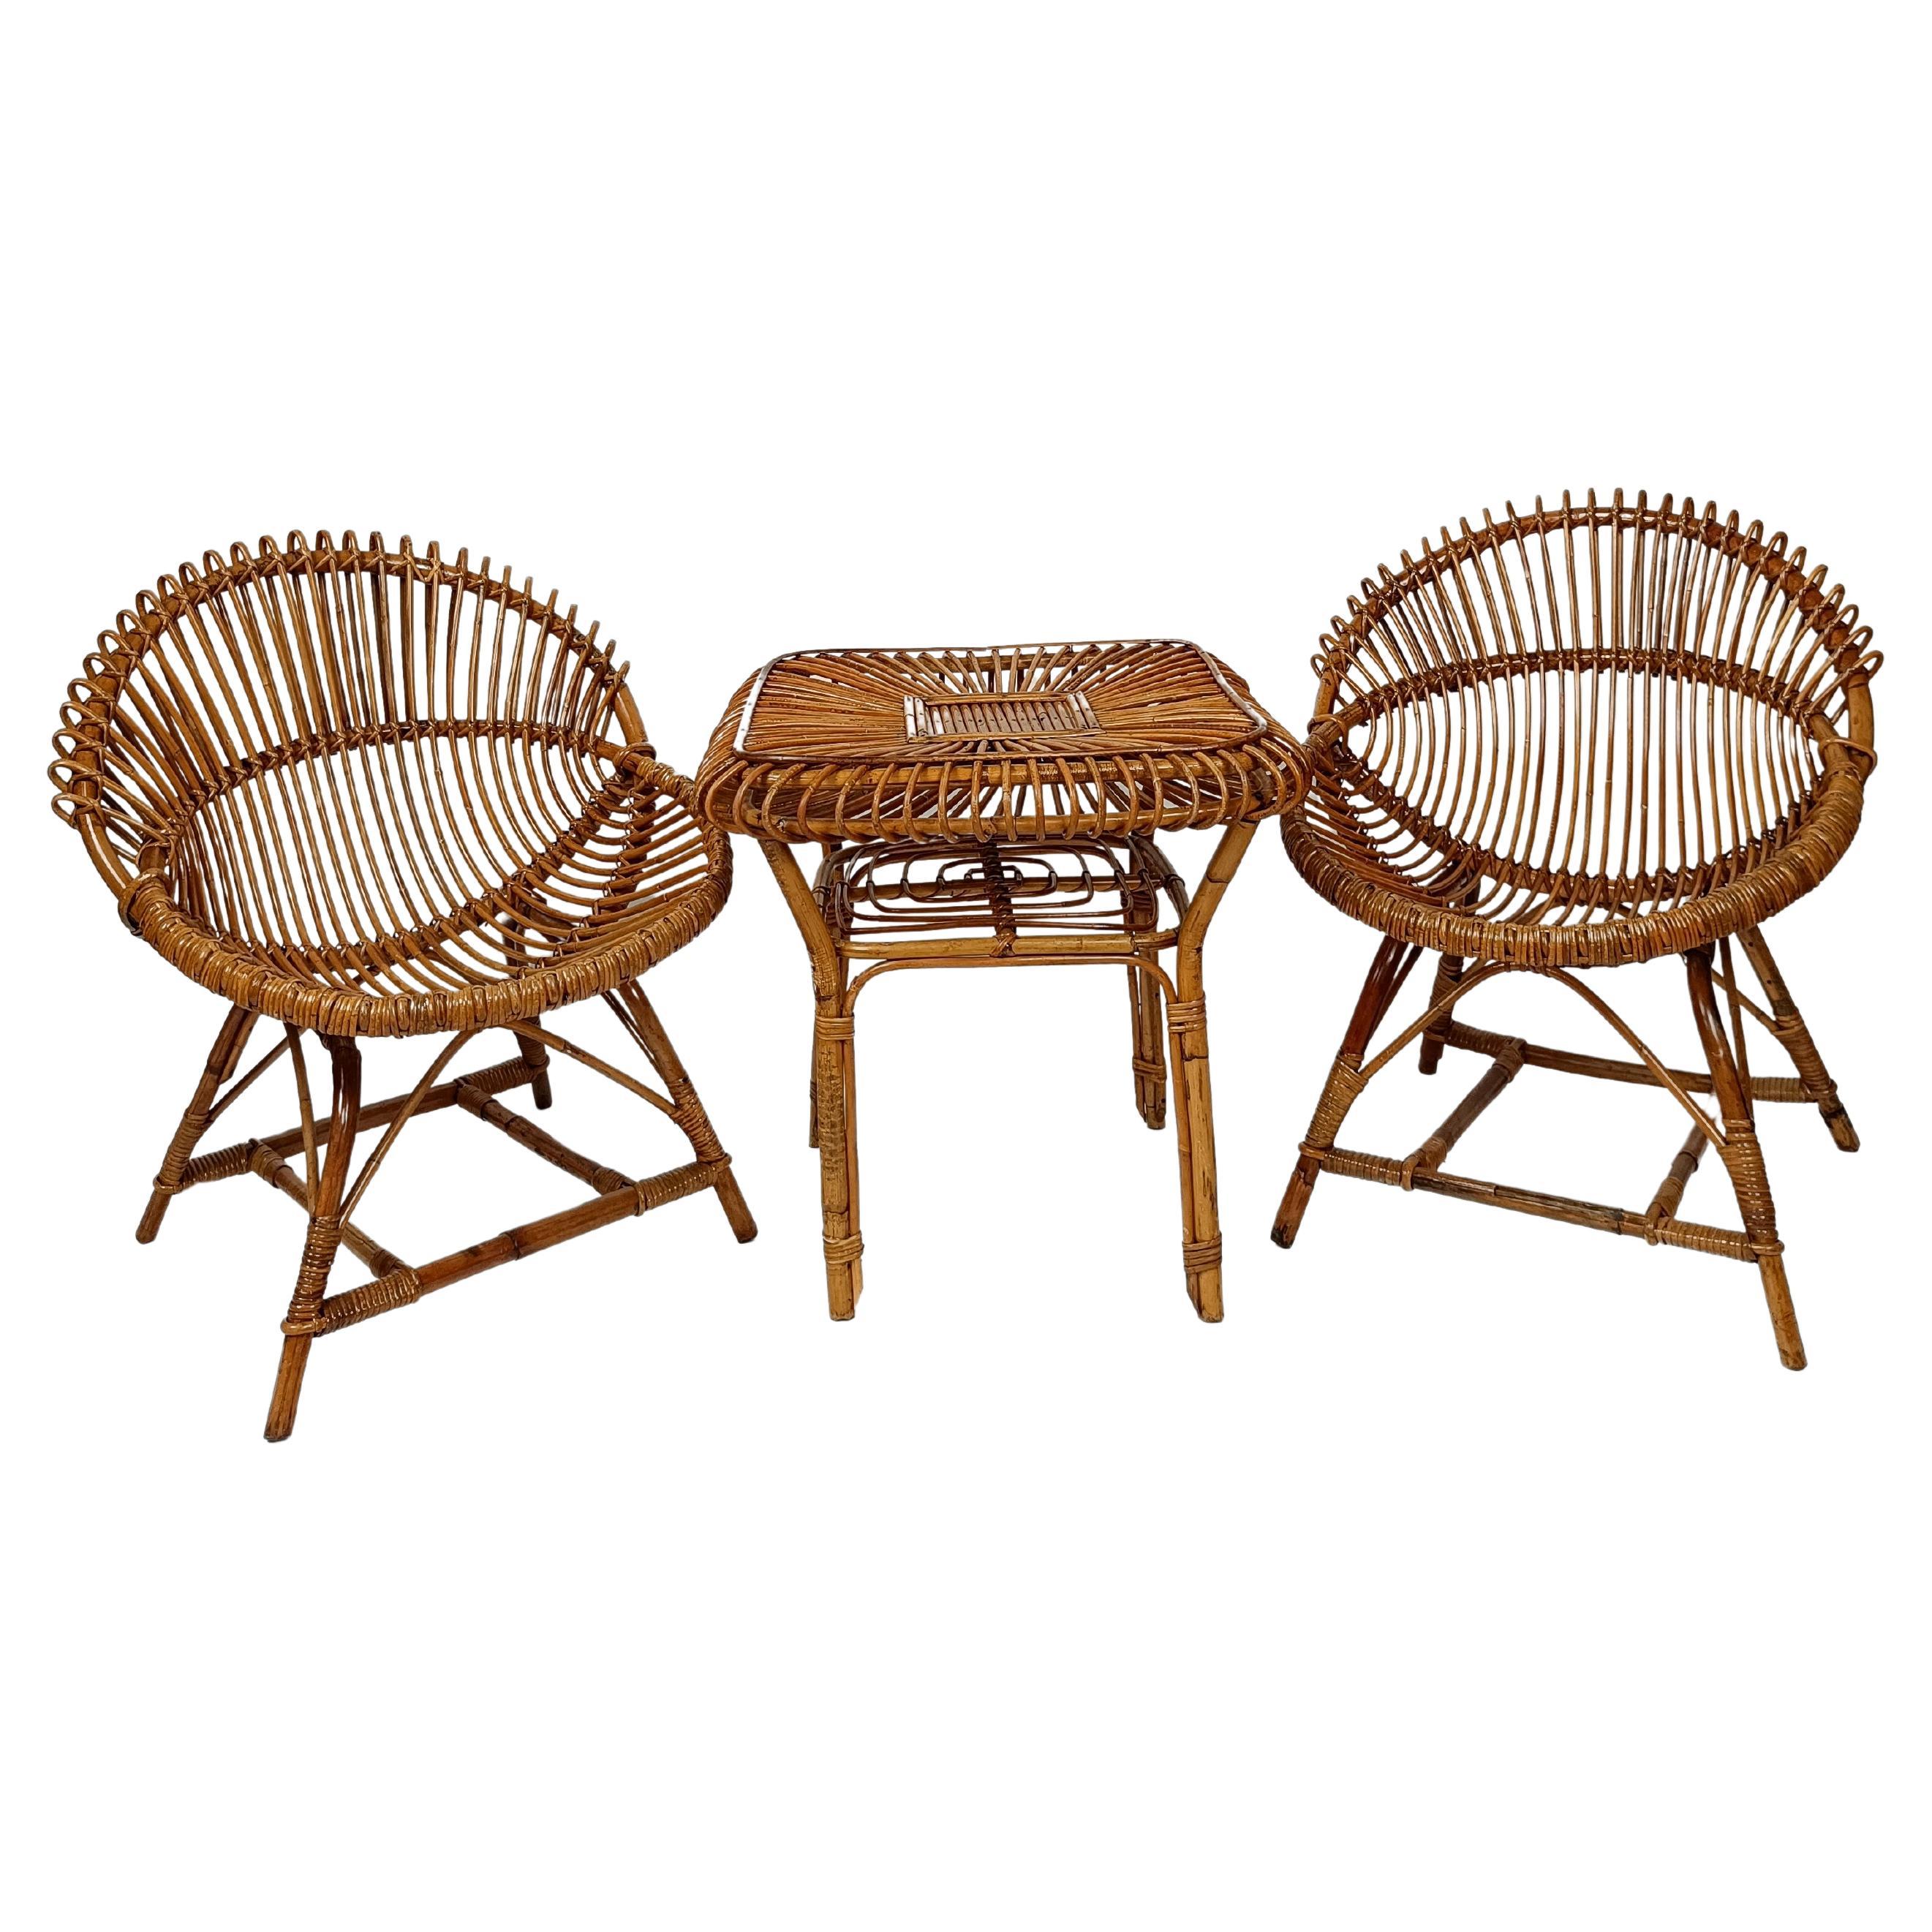 Vintage Cane and Rattan Set of 2 shell-shaped Armchairs with Coffe Table, 1960s